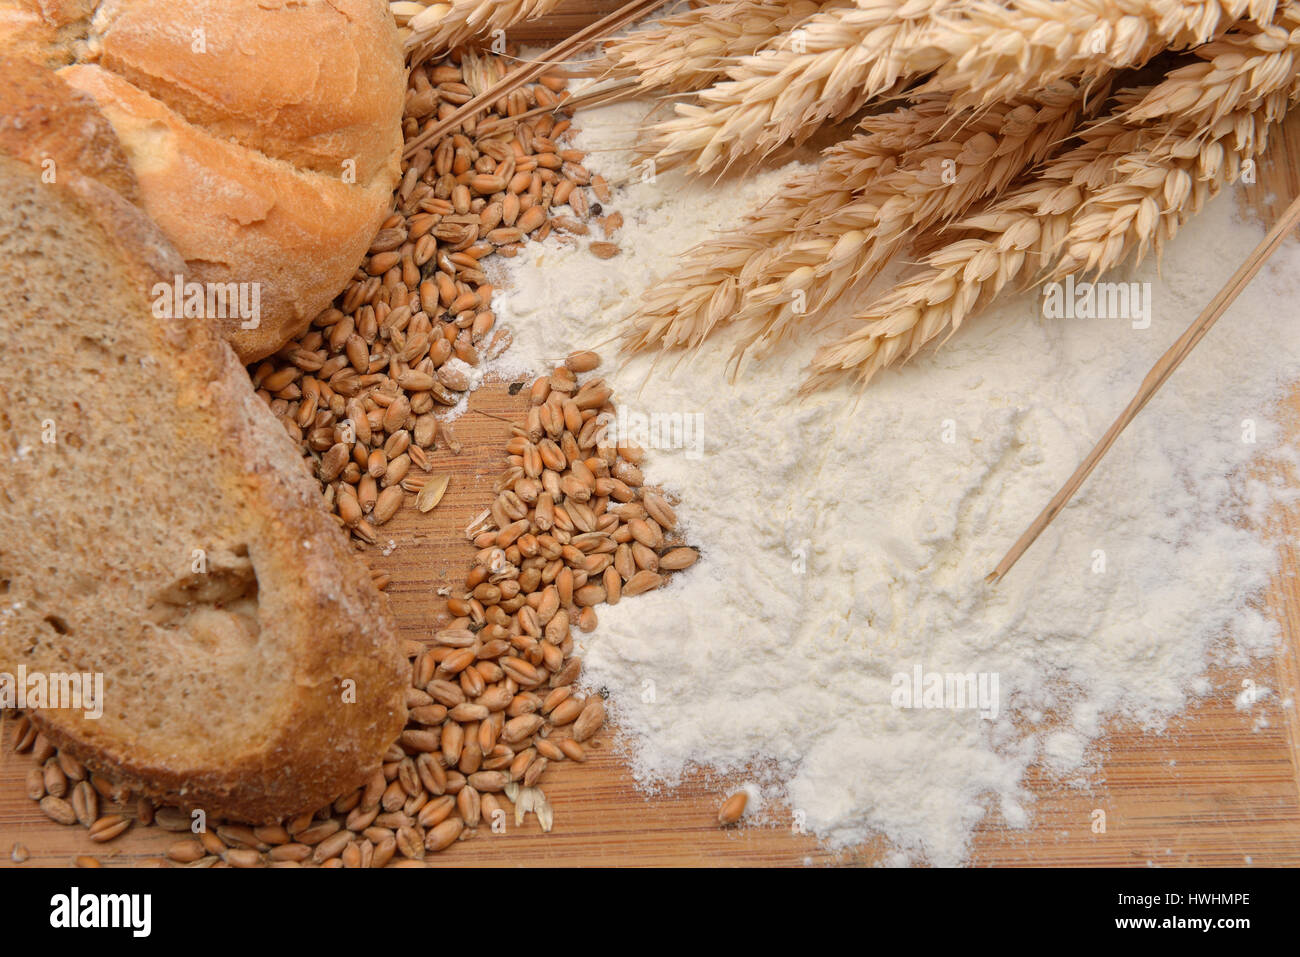 Grains, wheat ears, flour, bread and bagel on a wooden table. Concept of making food from cereals, raw material in finished product. Rustic background Stock Photo